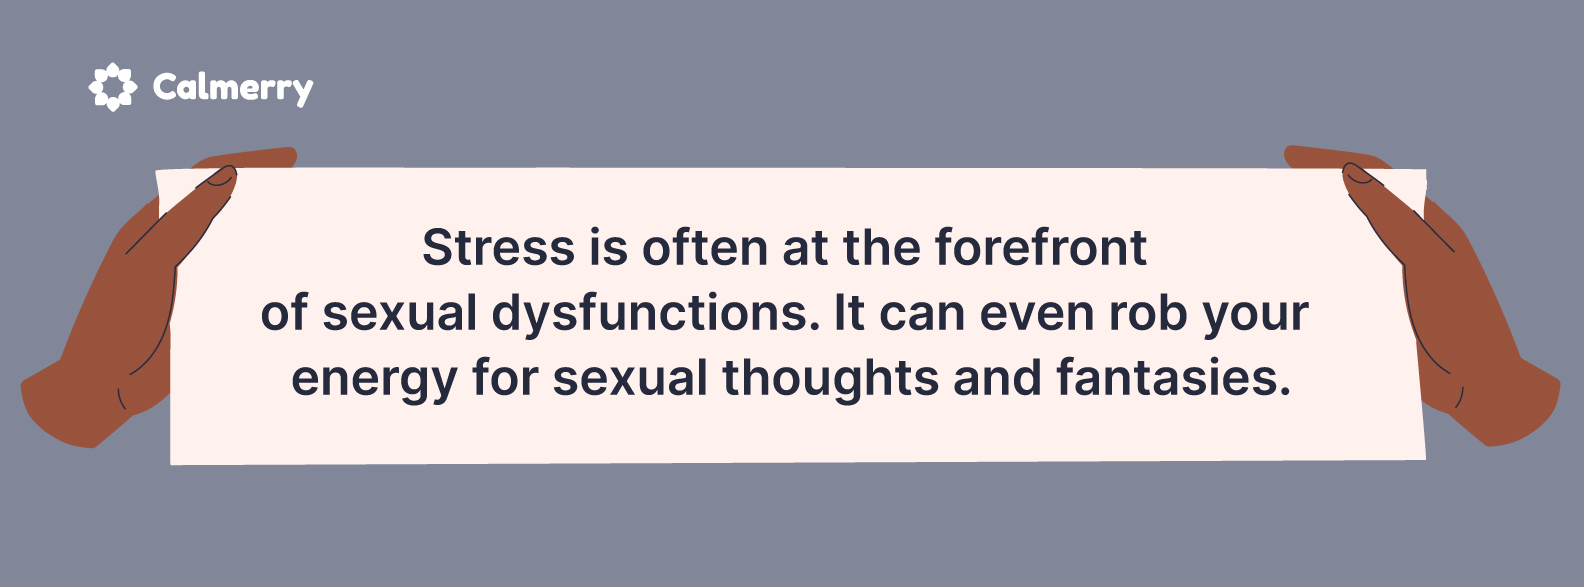 stress and sexual dysfunctions